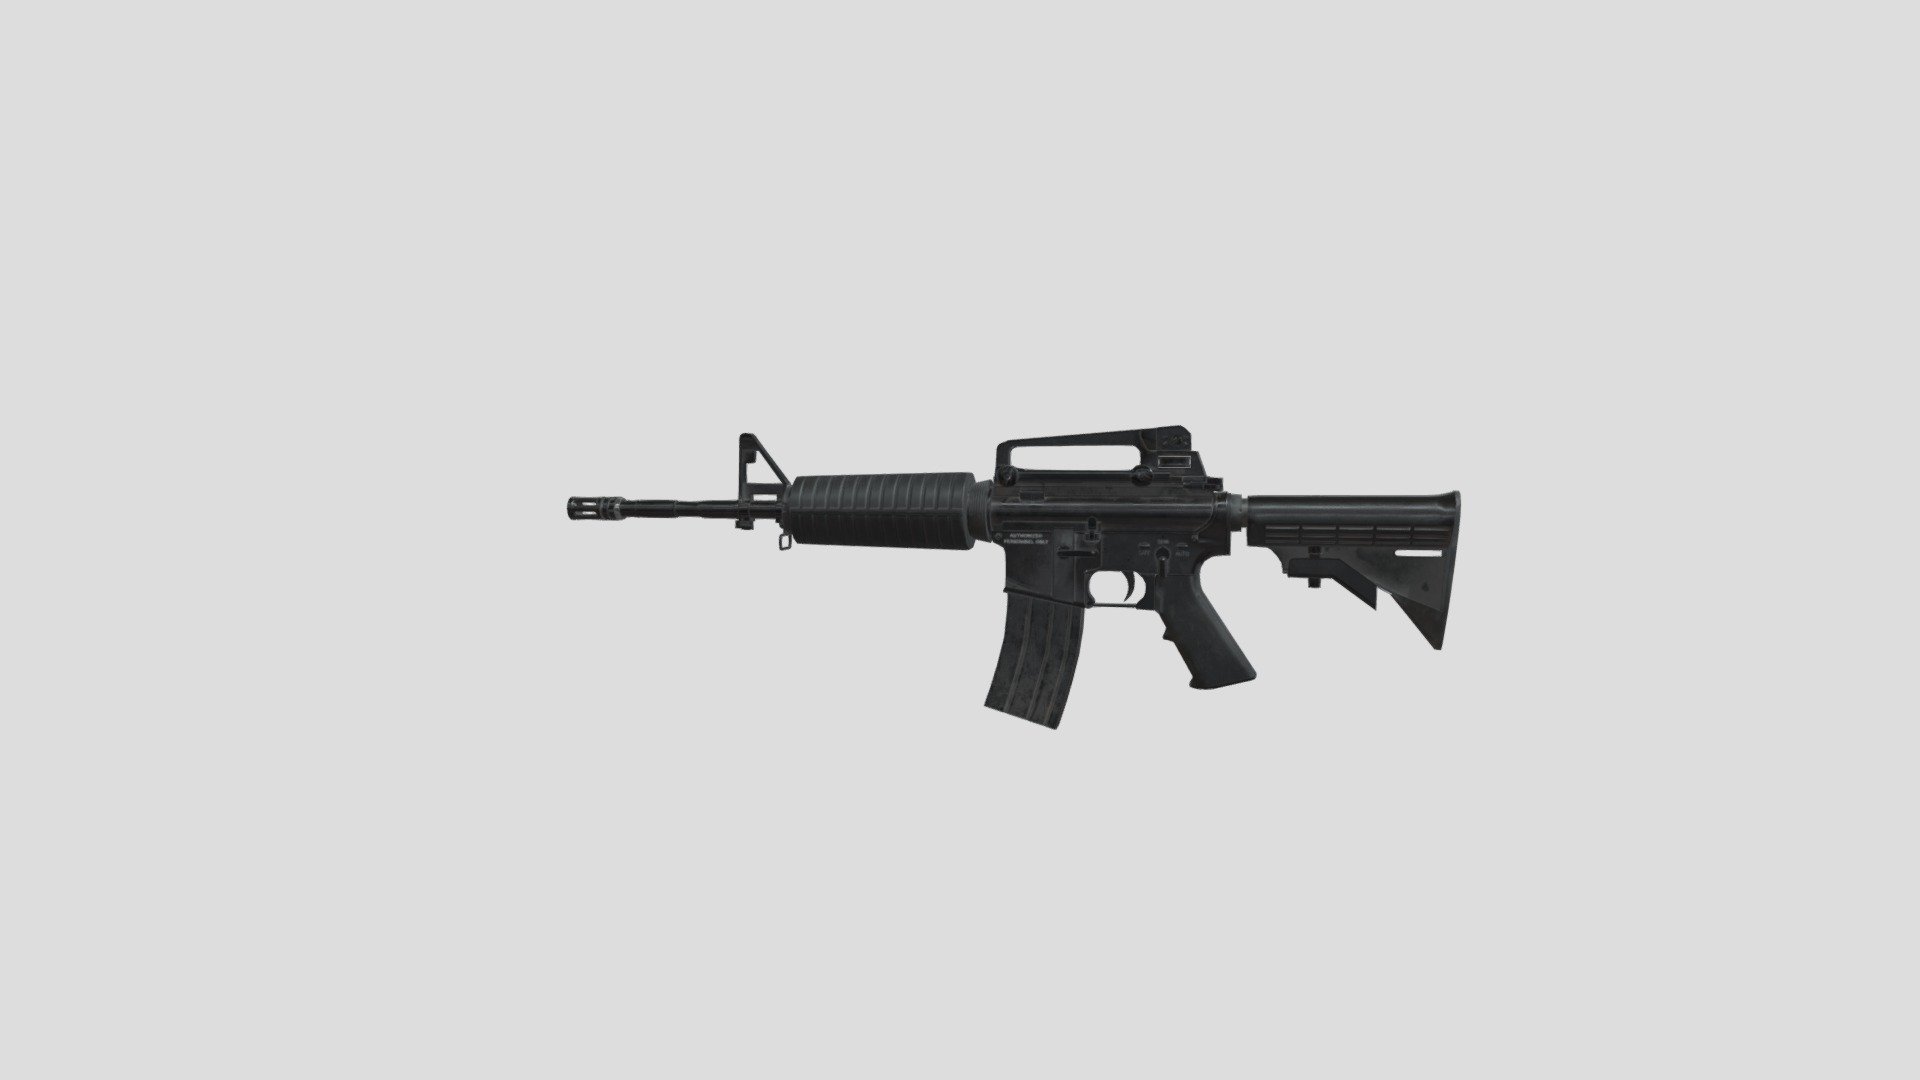 m4a1 - Download Free 3D model by hfh1740131277 [967f119] - Sketchfab